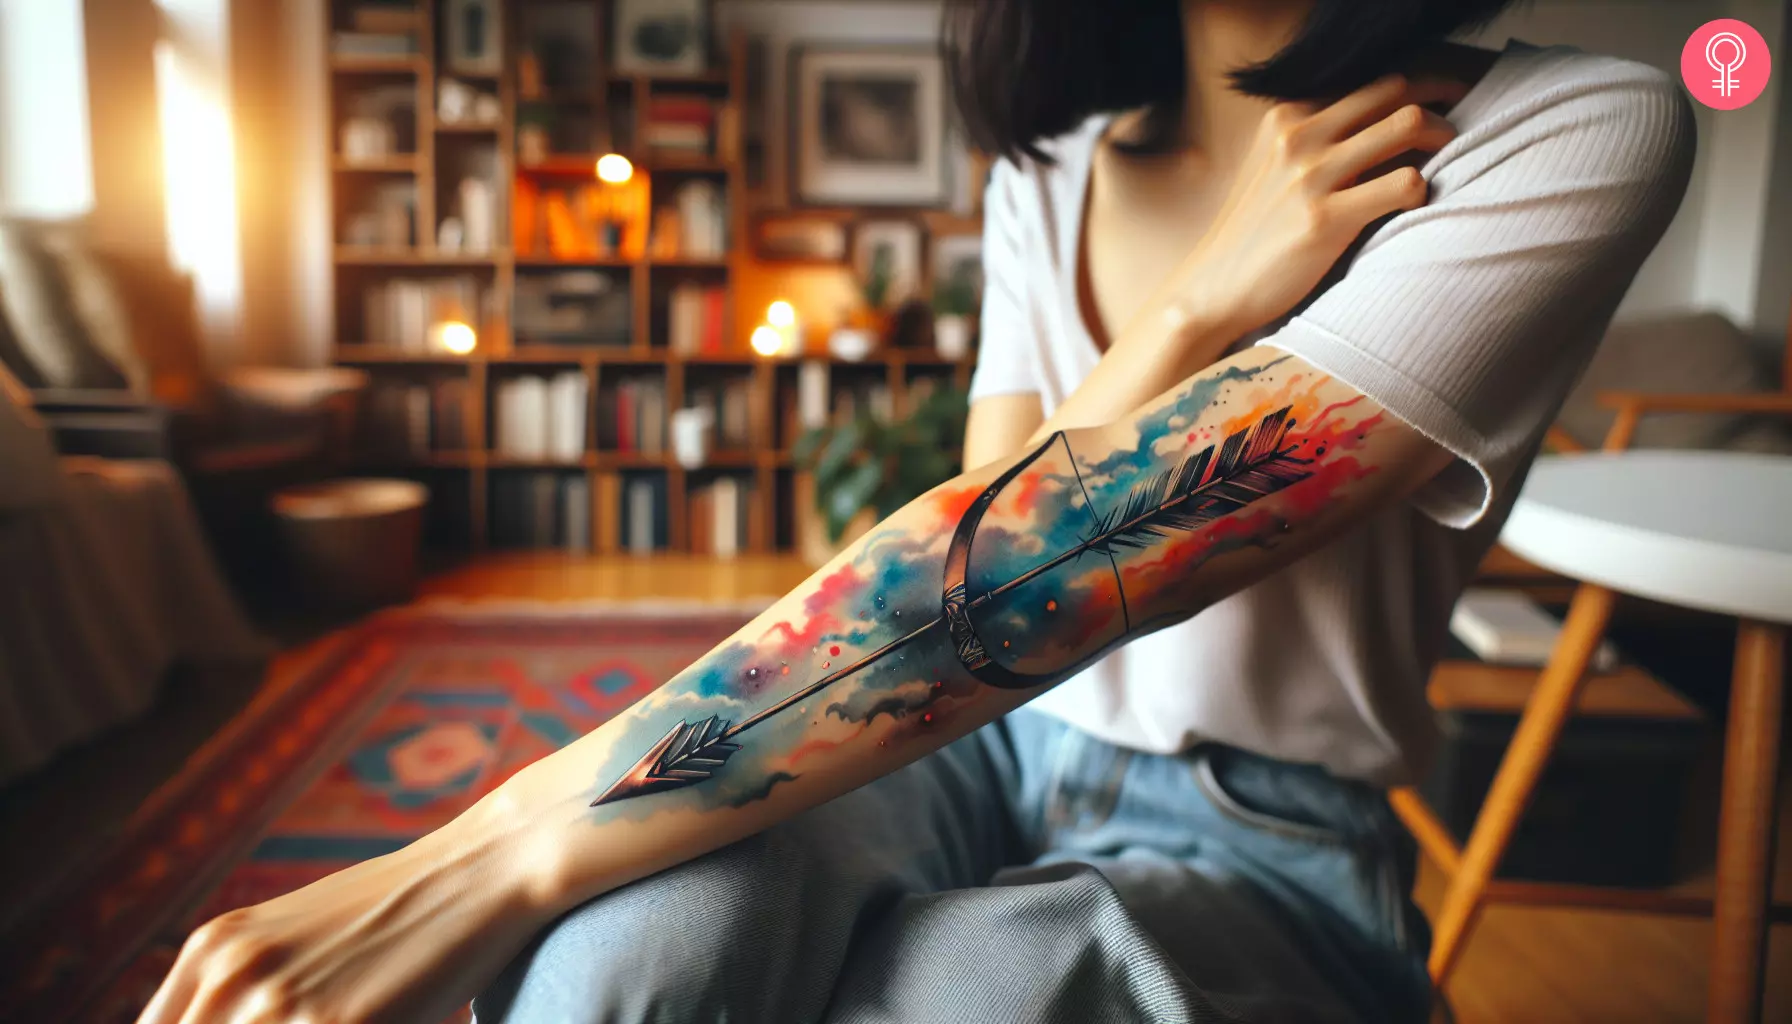 Watercolor bow and arrow Sagittarius tattoo on the forearm of a woman